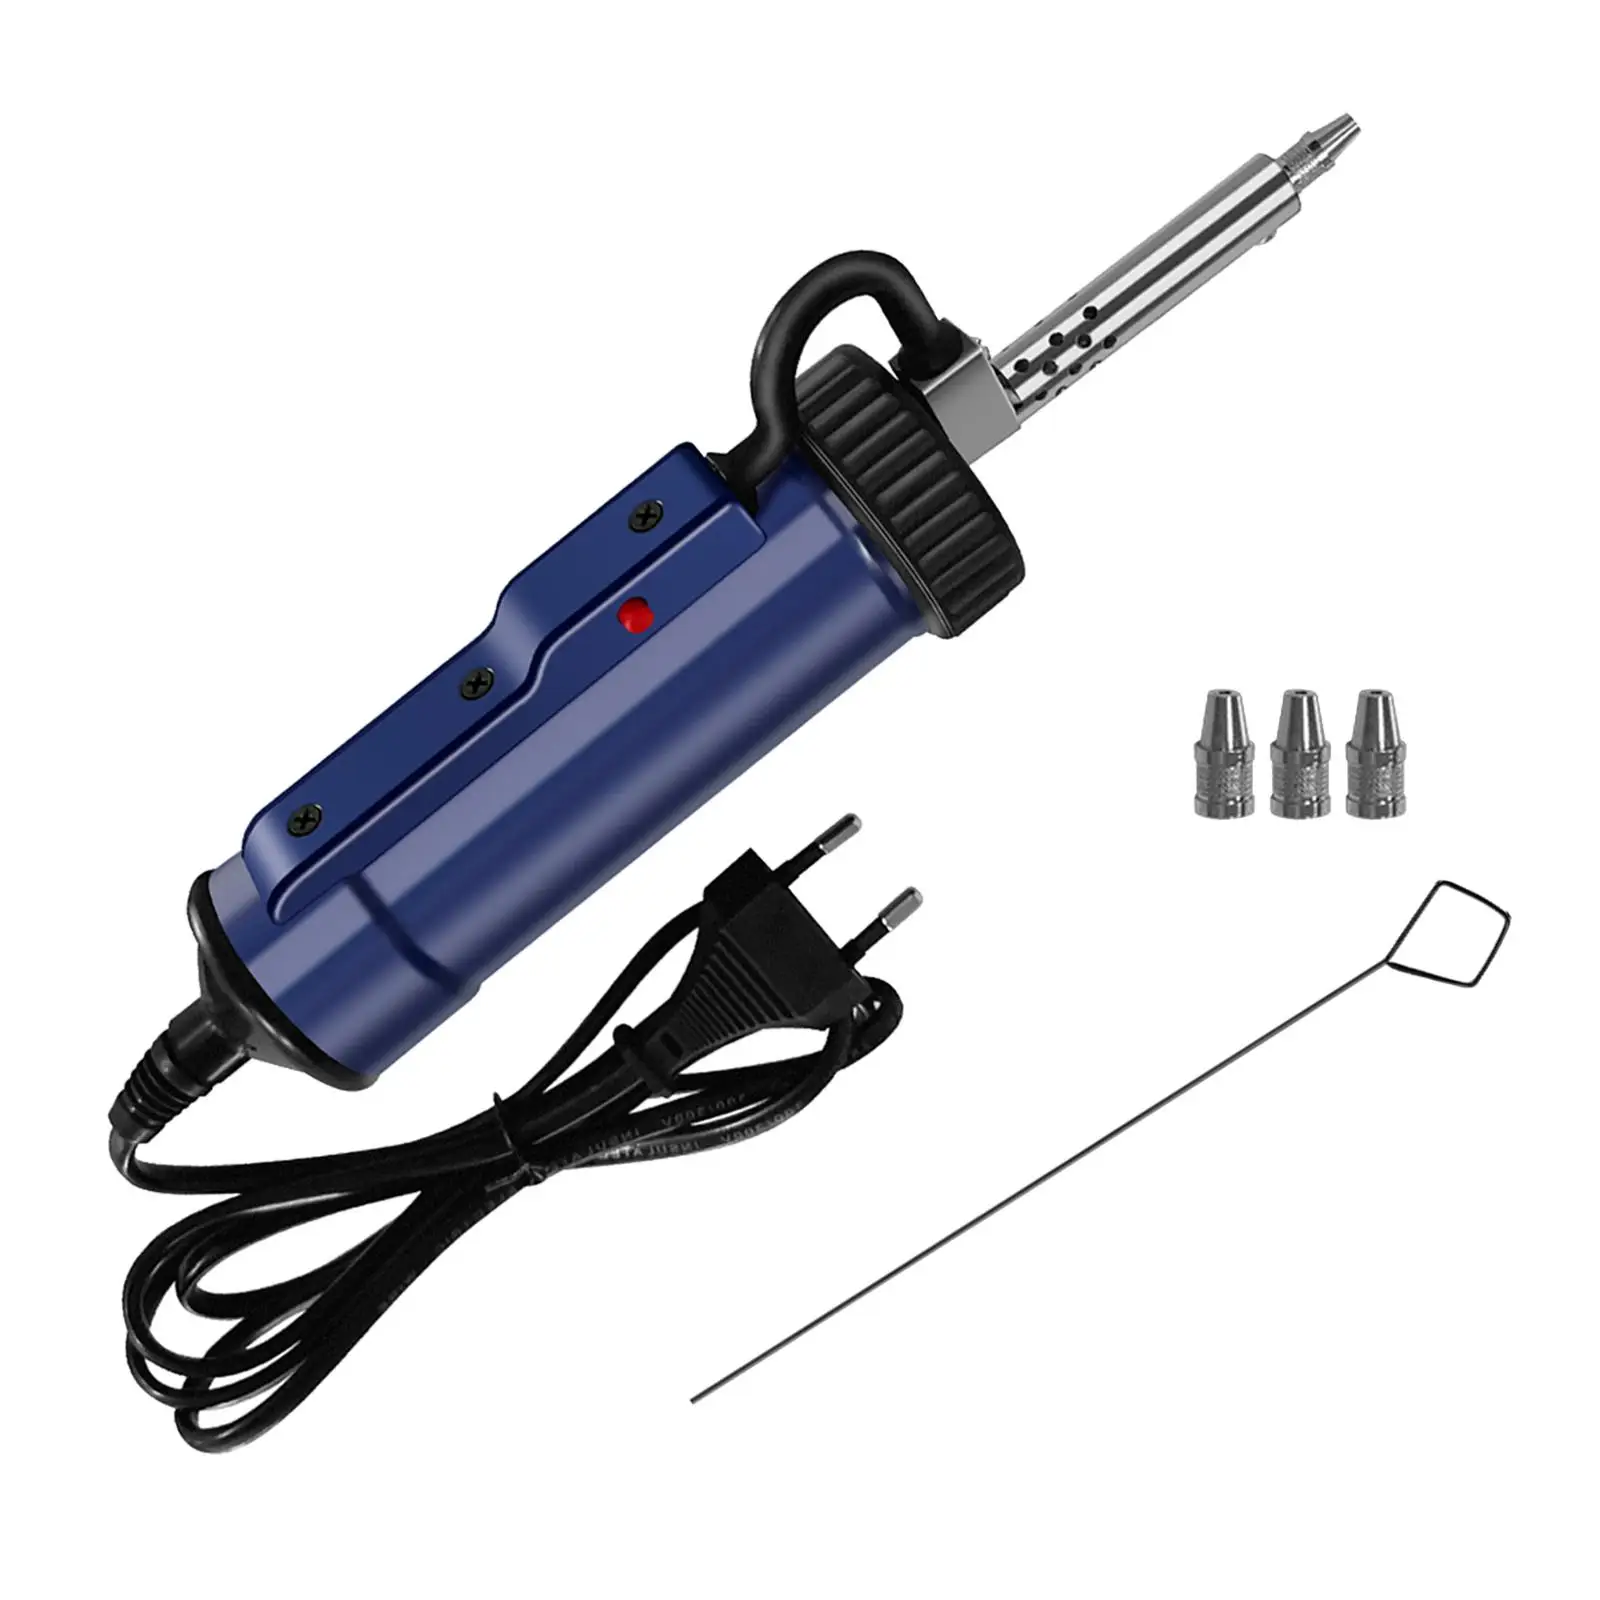 Automatic Desoldering Pump DIY with Suction Tips Electric Solder Tin Suckers Solder Iron for Jewelry Home DIY Hobby